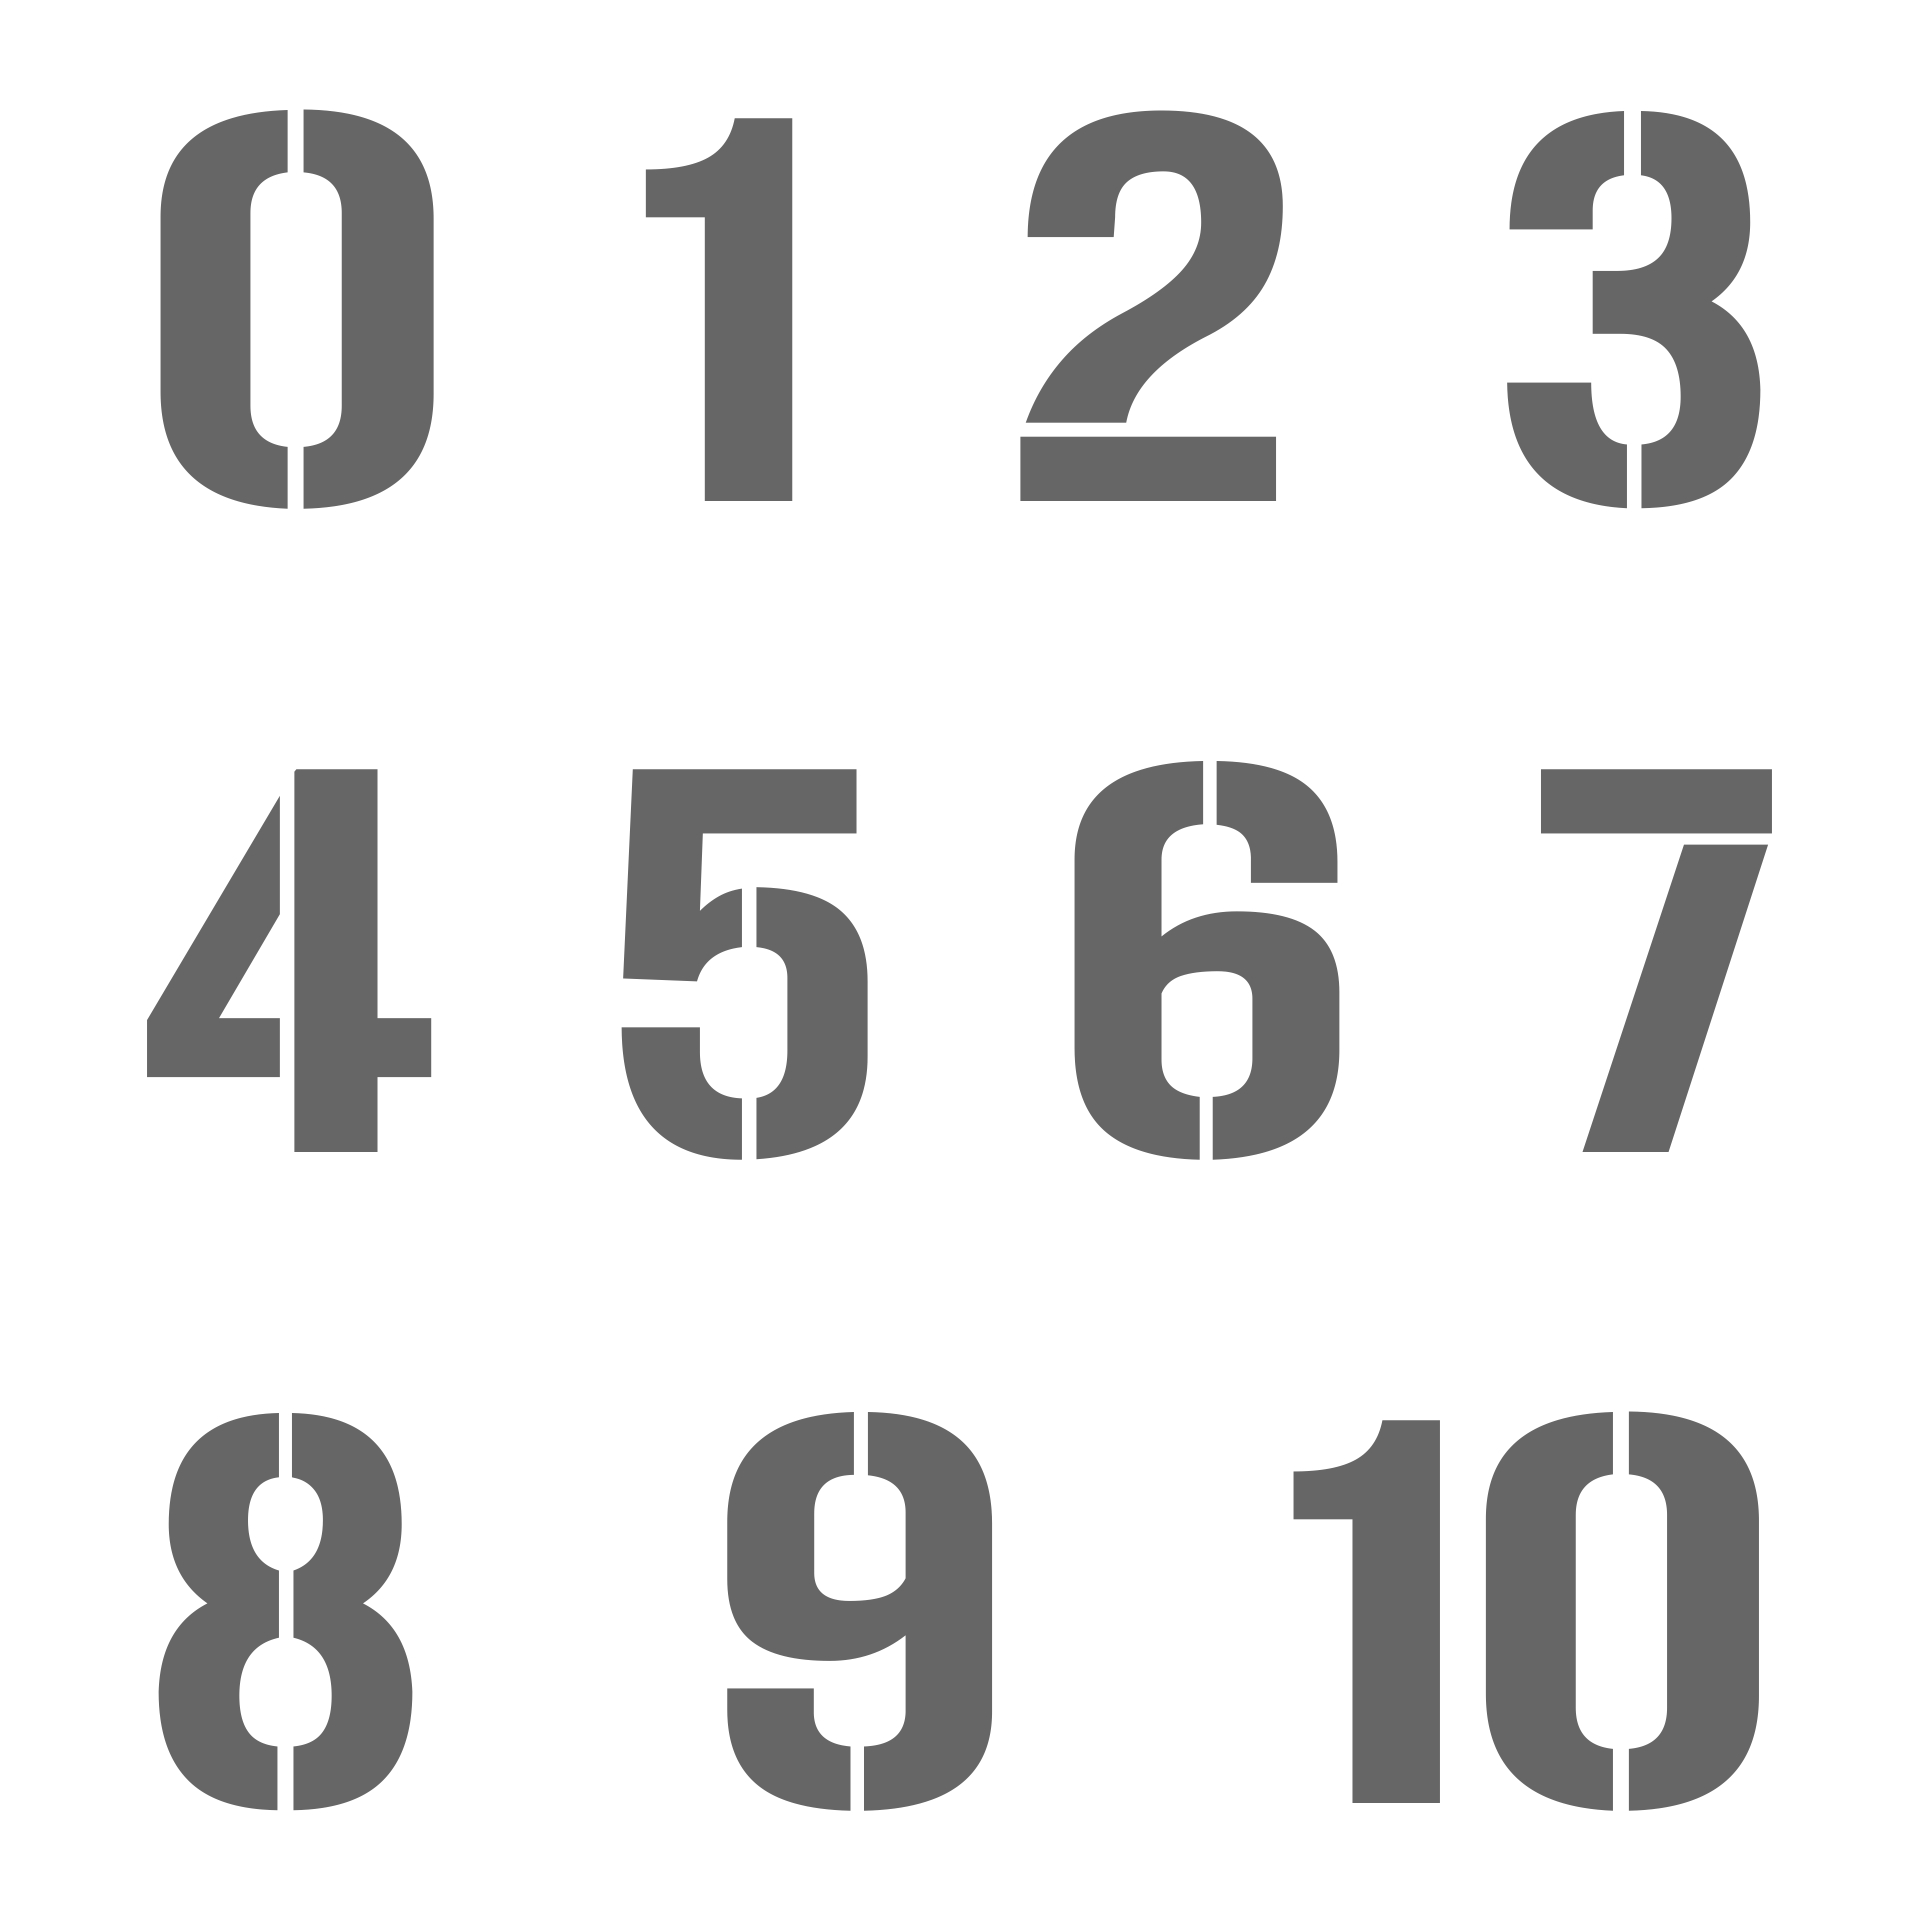 Free Number Stencils You Can Print Printable Form Templates And Letter